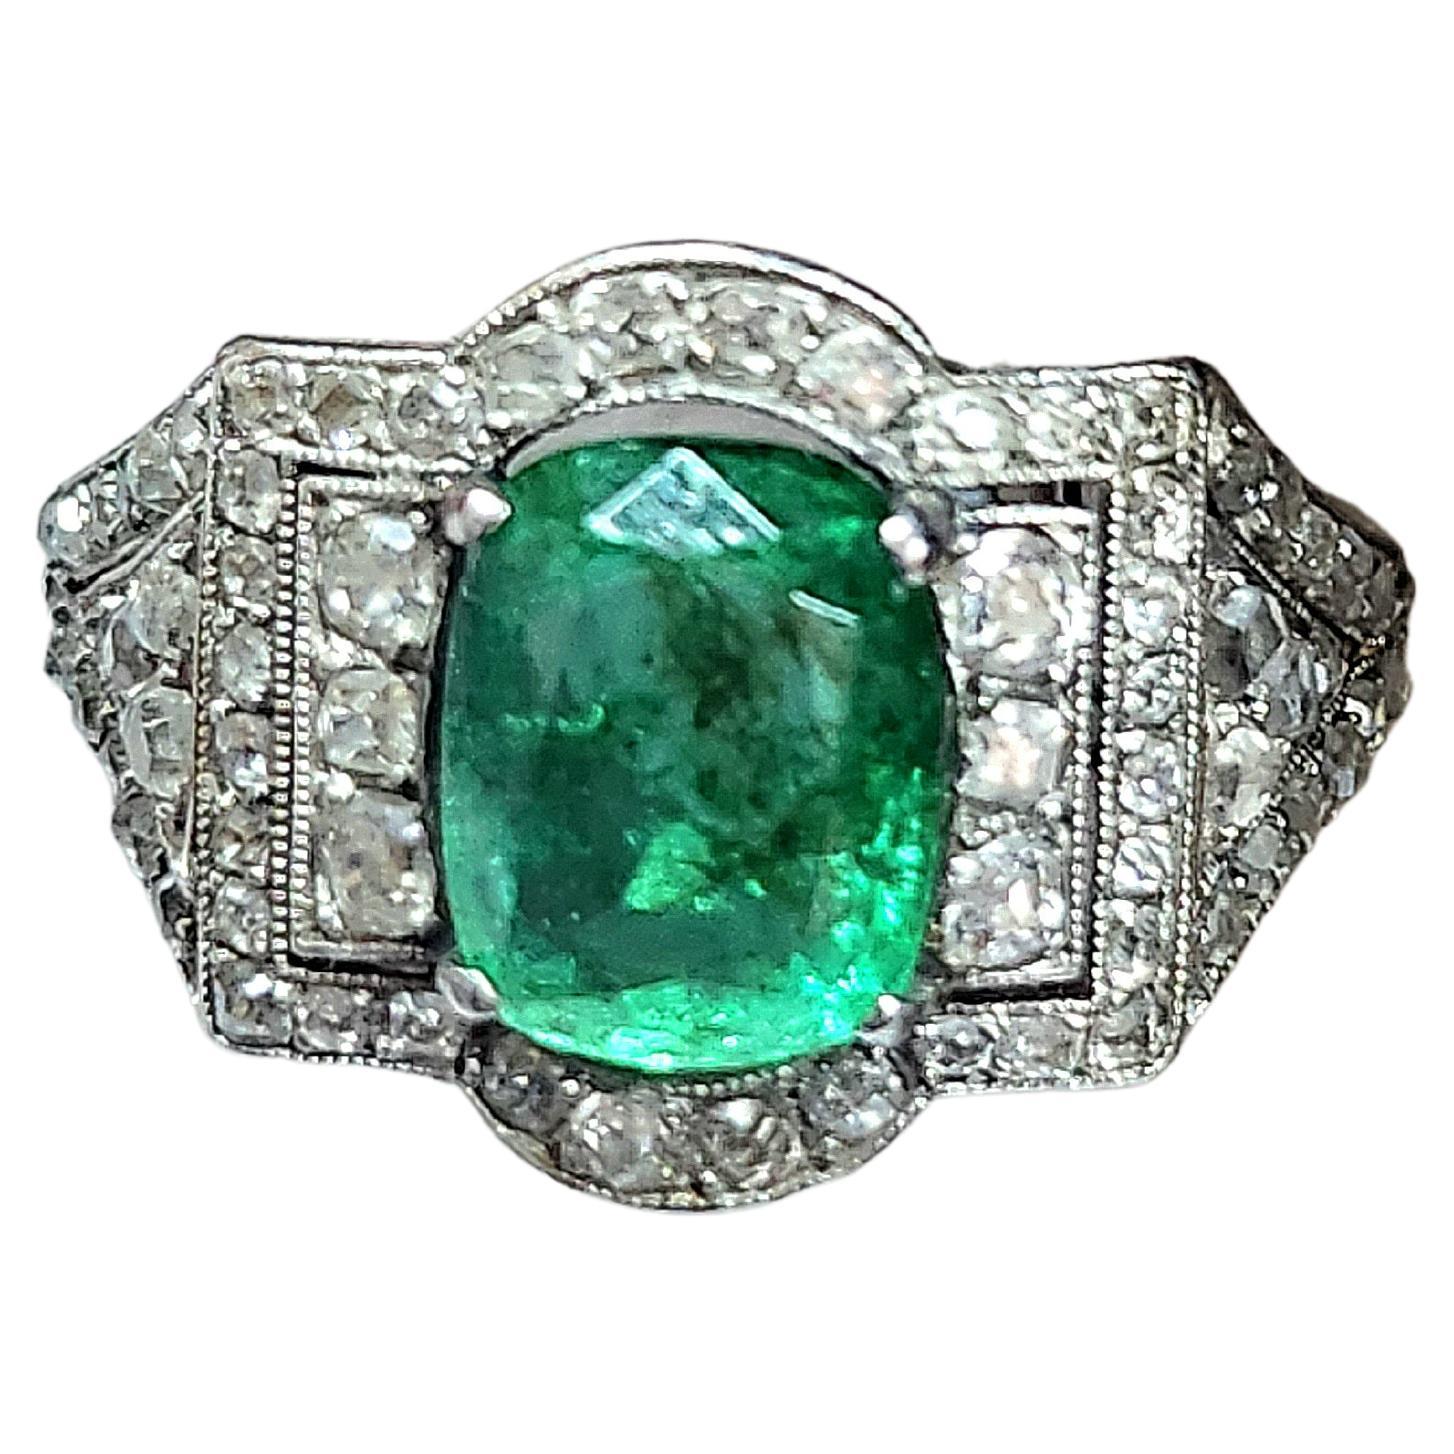 Art deco platinum ring centered with 1 natural rich green emerald colour in oval cut with a stone diameter of 8.45mm×7mm estimate weight 3 carats flanked with rose cut diamonds ring was made in france during the art deco era 1930.c hall marked with